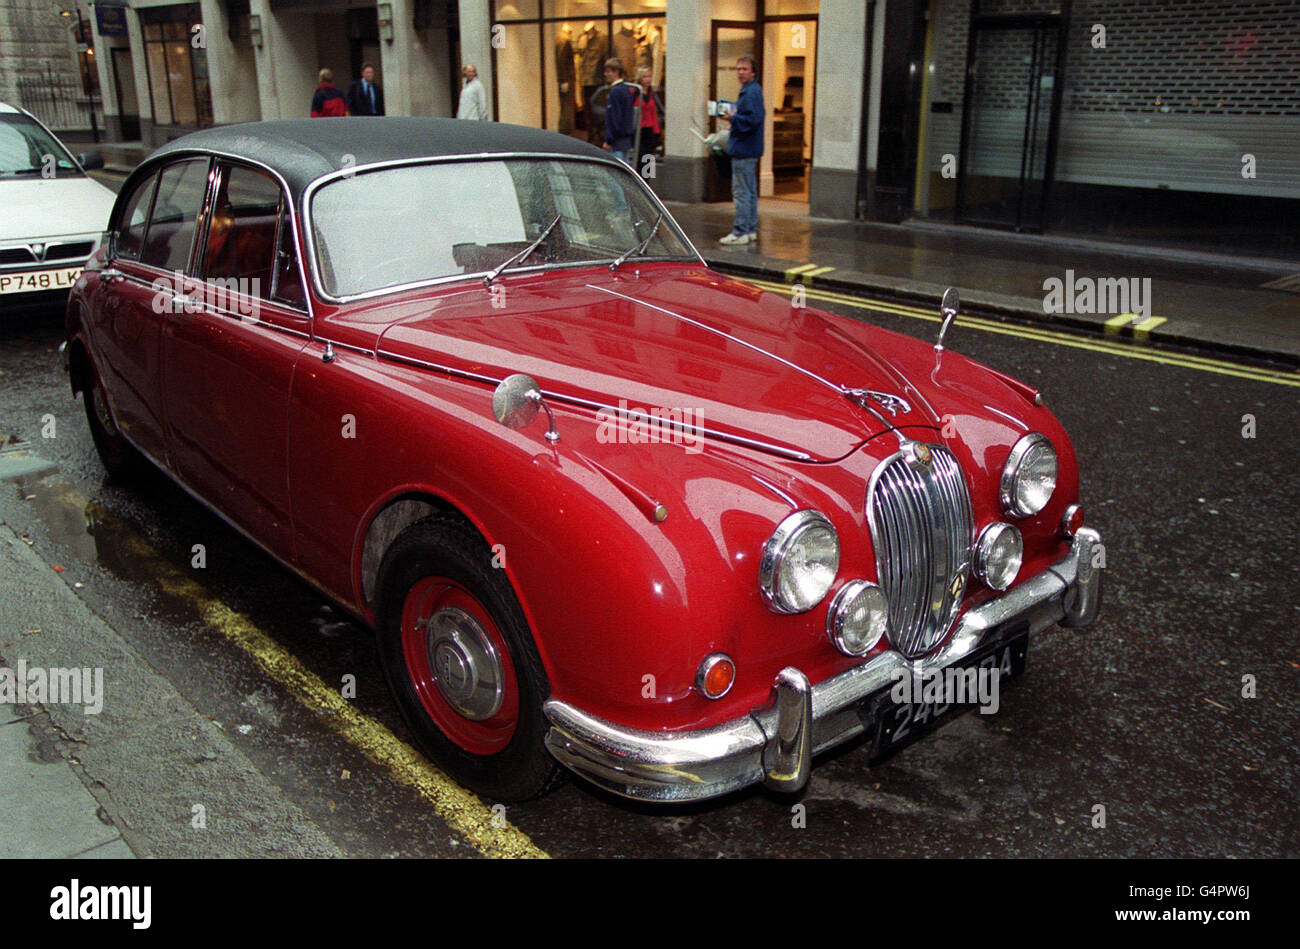 Inspector Morse 's red Jaguar car in London. Author Colin Dexter confirmed that he has killed off Inspector Morse as the final mystery 'The Remorseful Day' hit the bookshelves. * In the 13 novel the detective finally succumbs to the diabetes which has dogged him over the years. Thaw has starred as the detective in all 32 of the TV films. Stock Photo